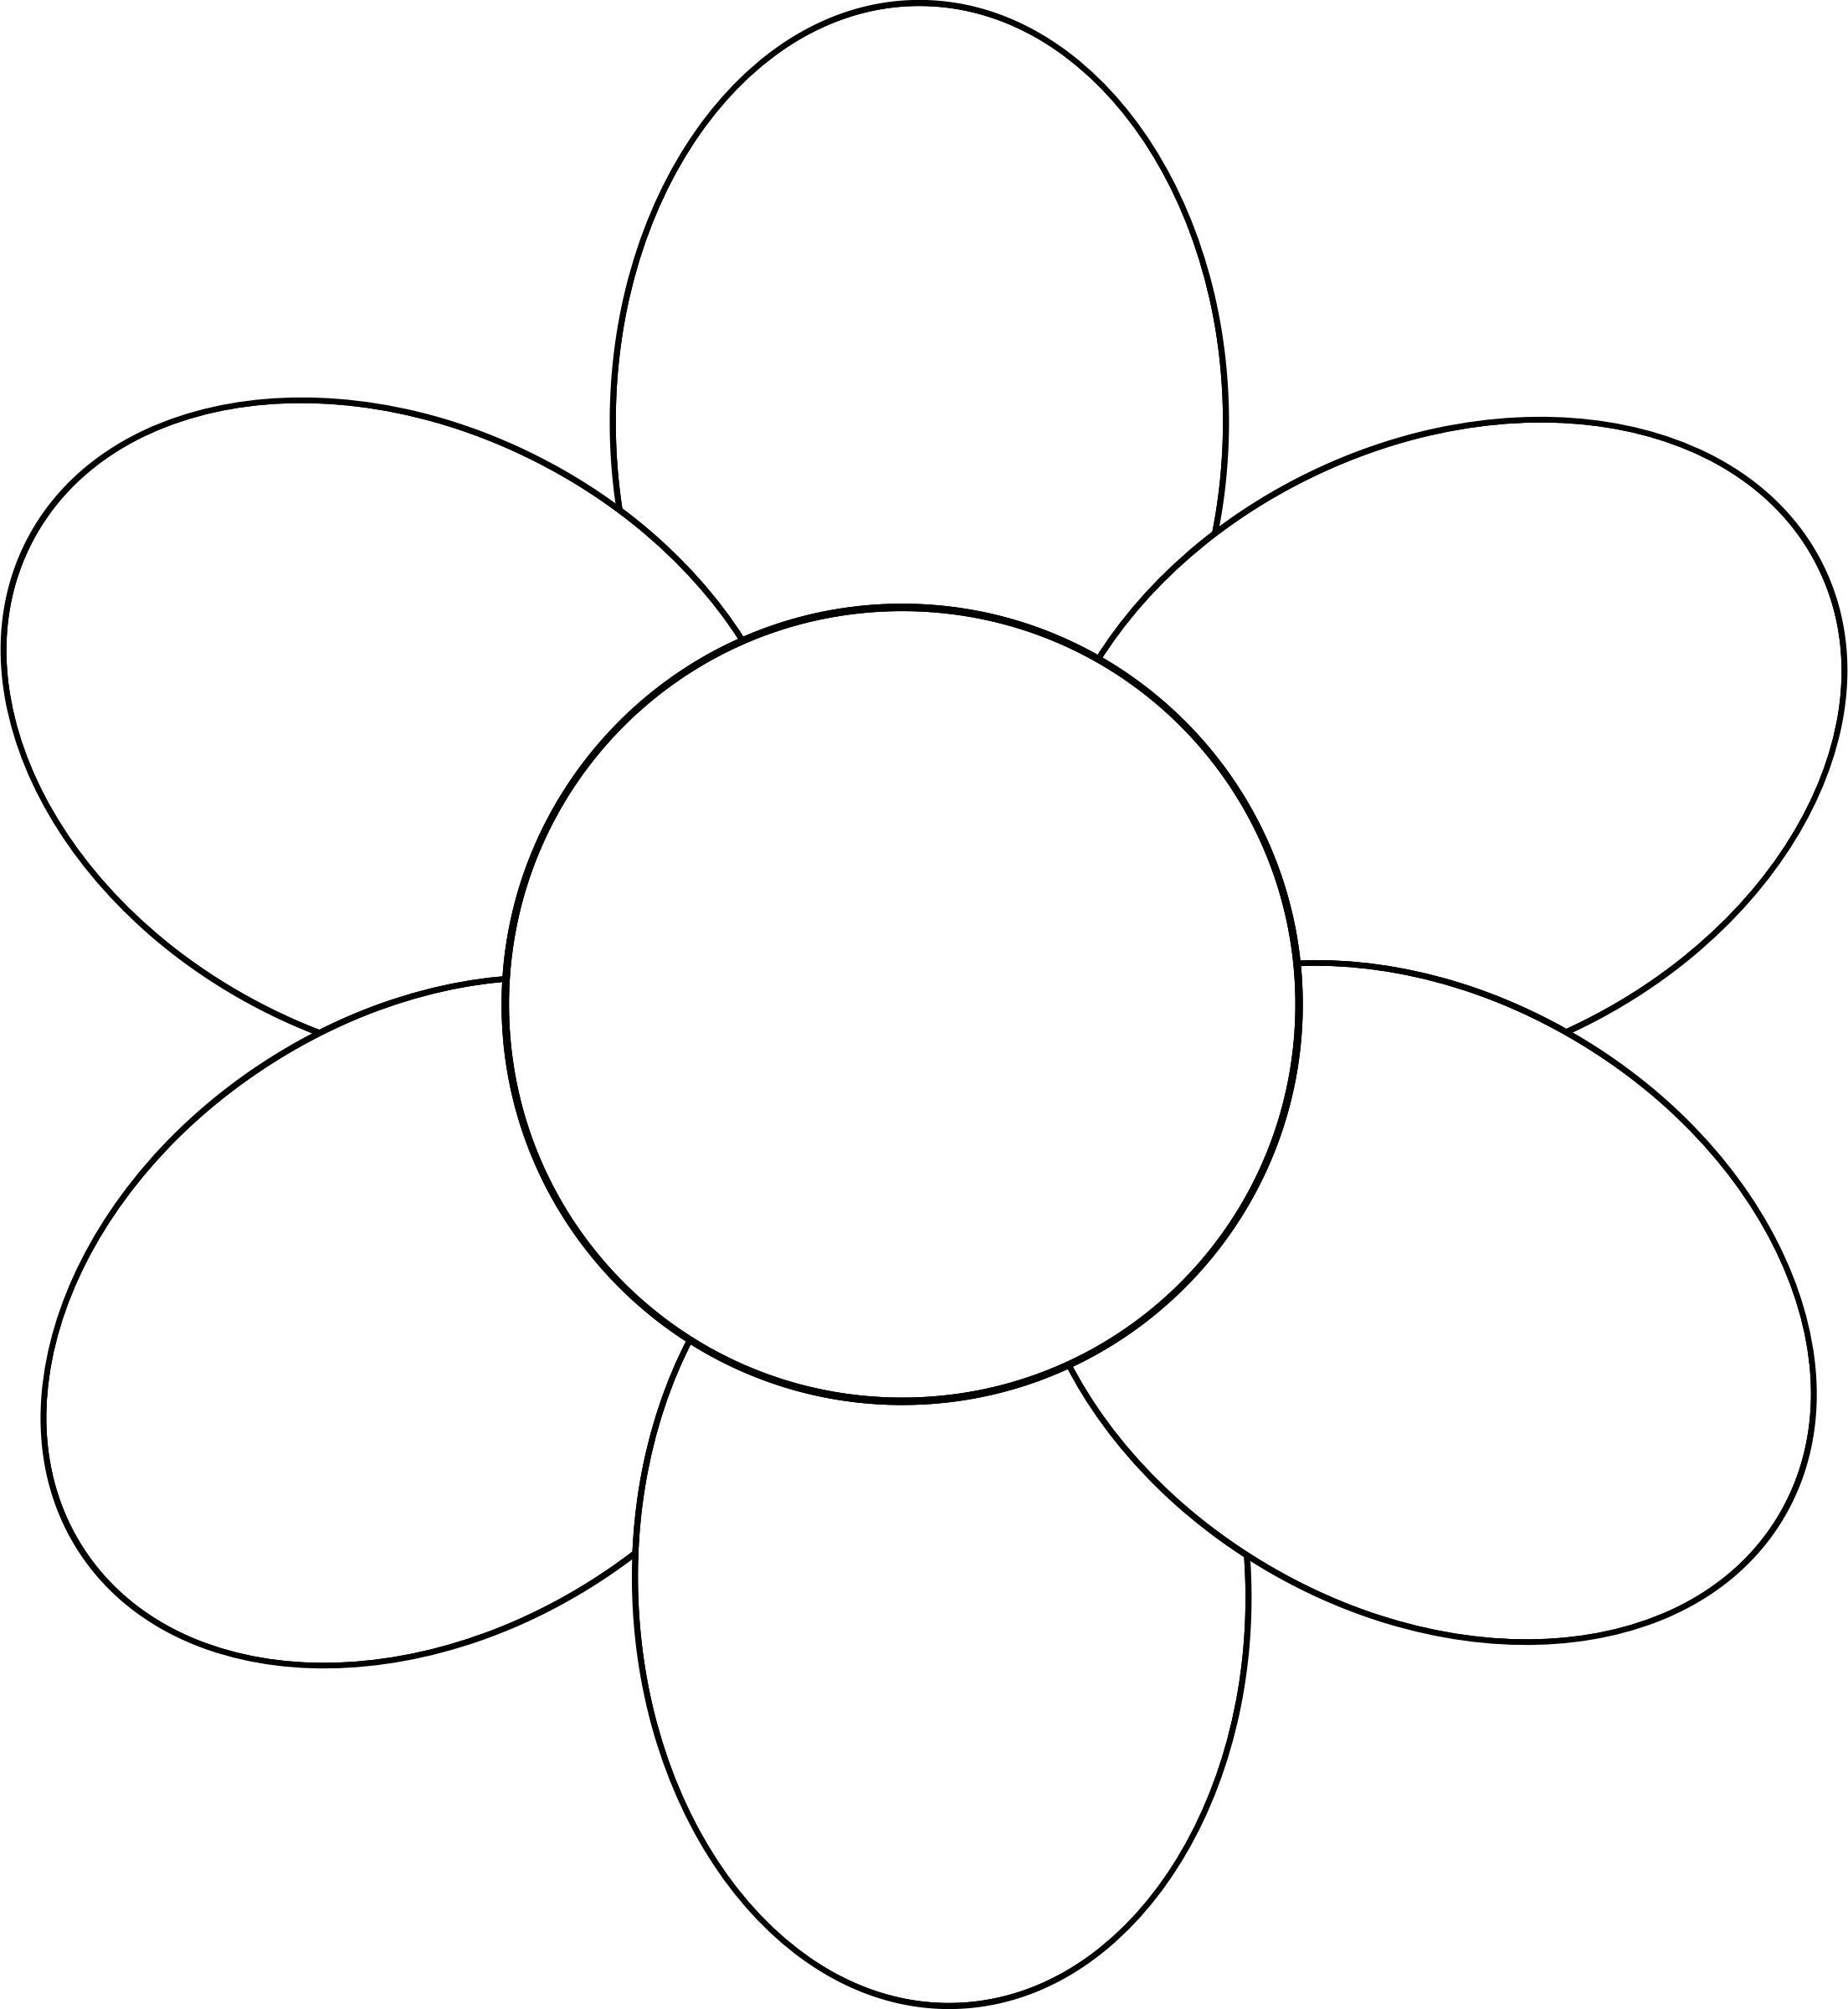 A White Flower With Six Petals